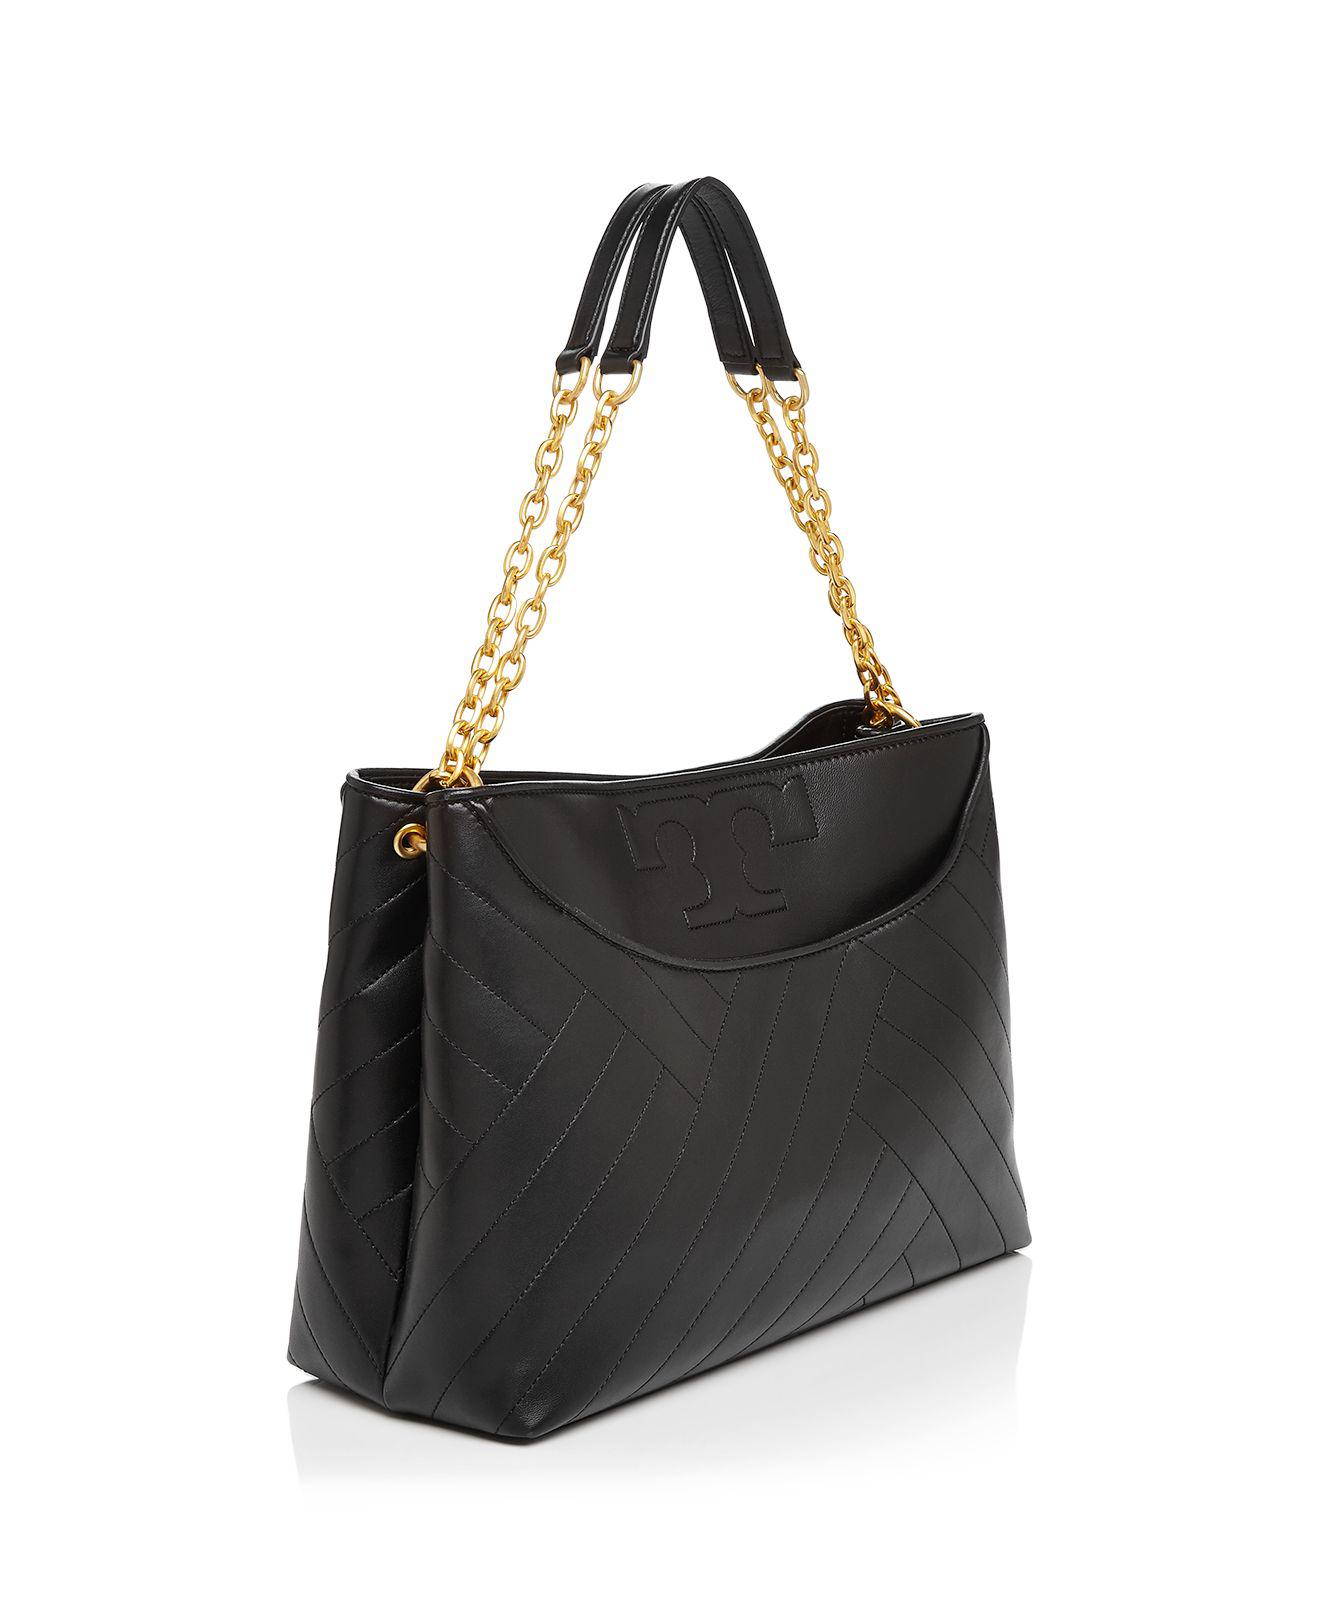 Lyst - Tory Burch Alexa Quilted Slouchy Leather Tote in Black